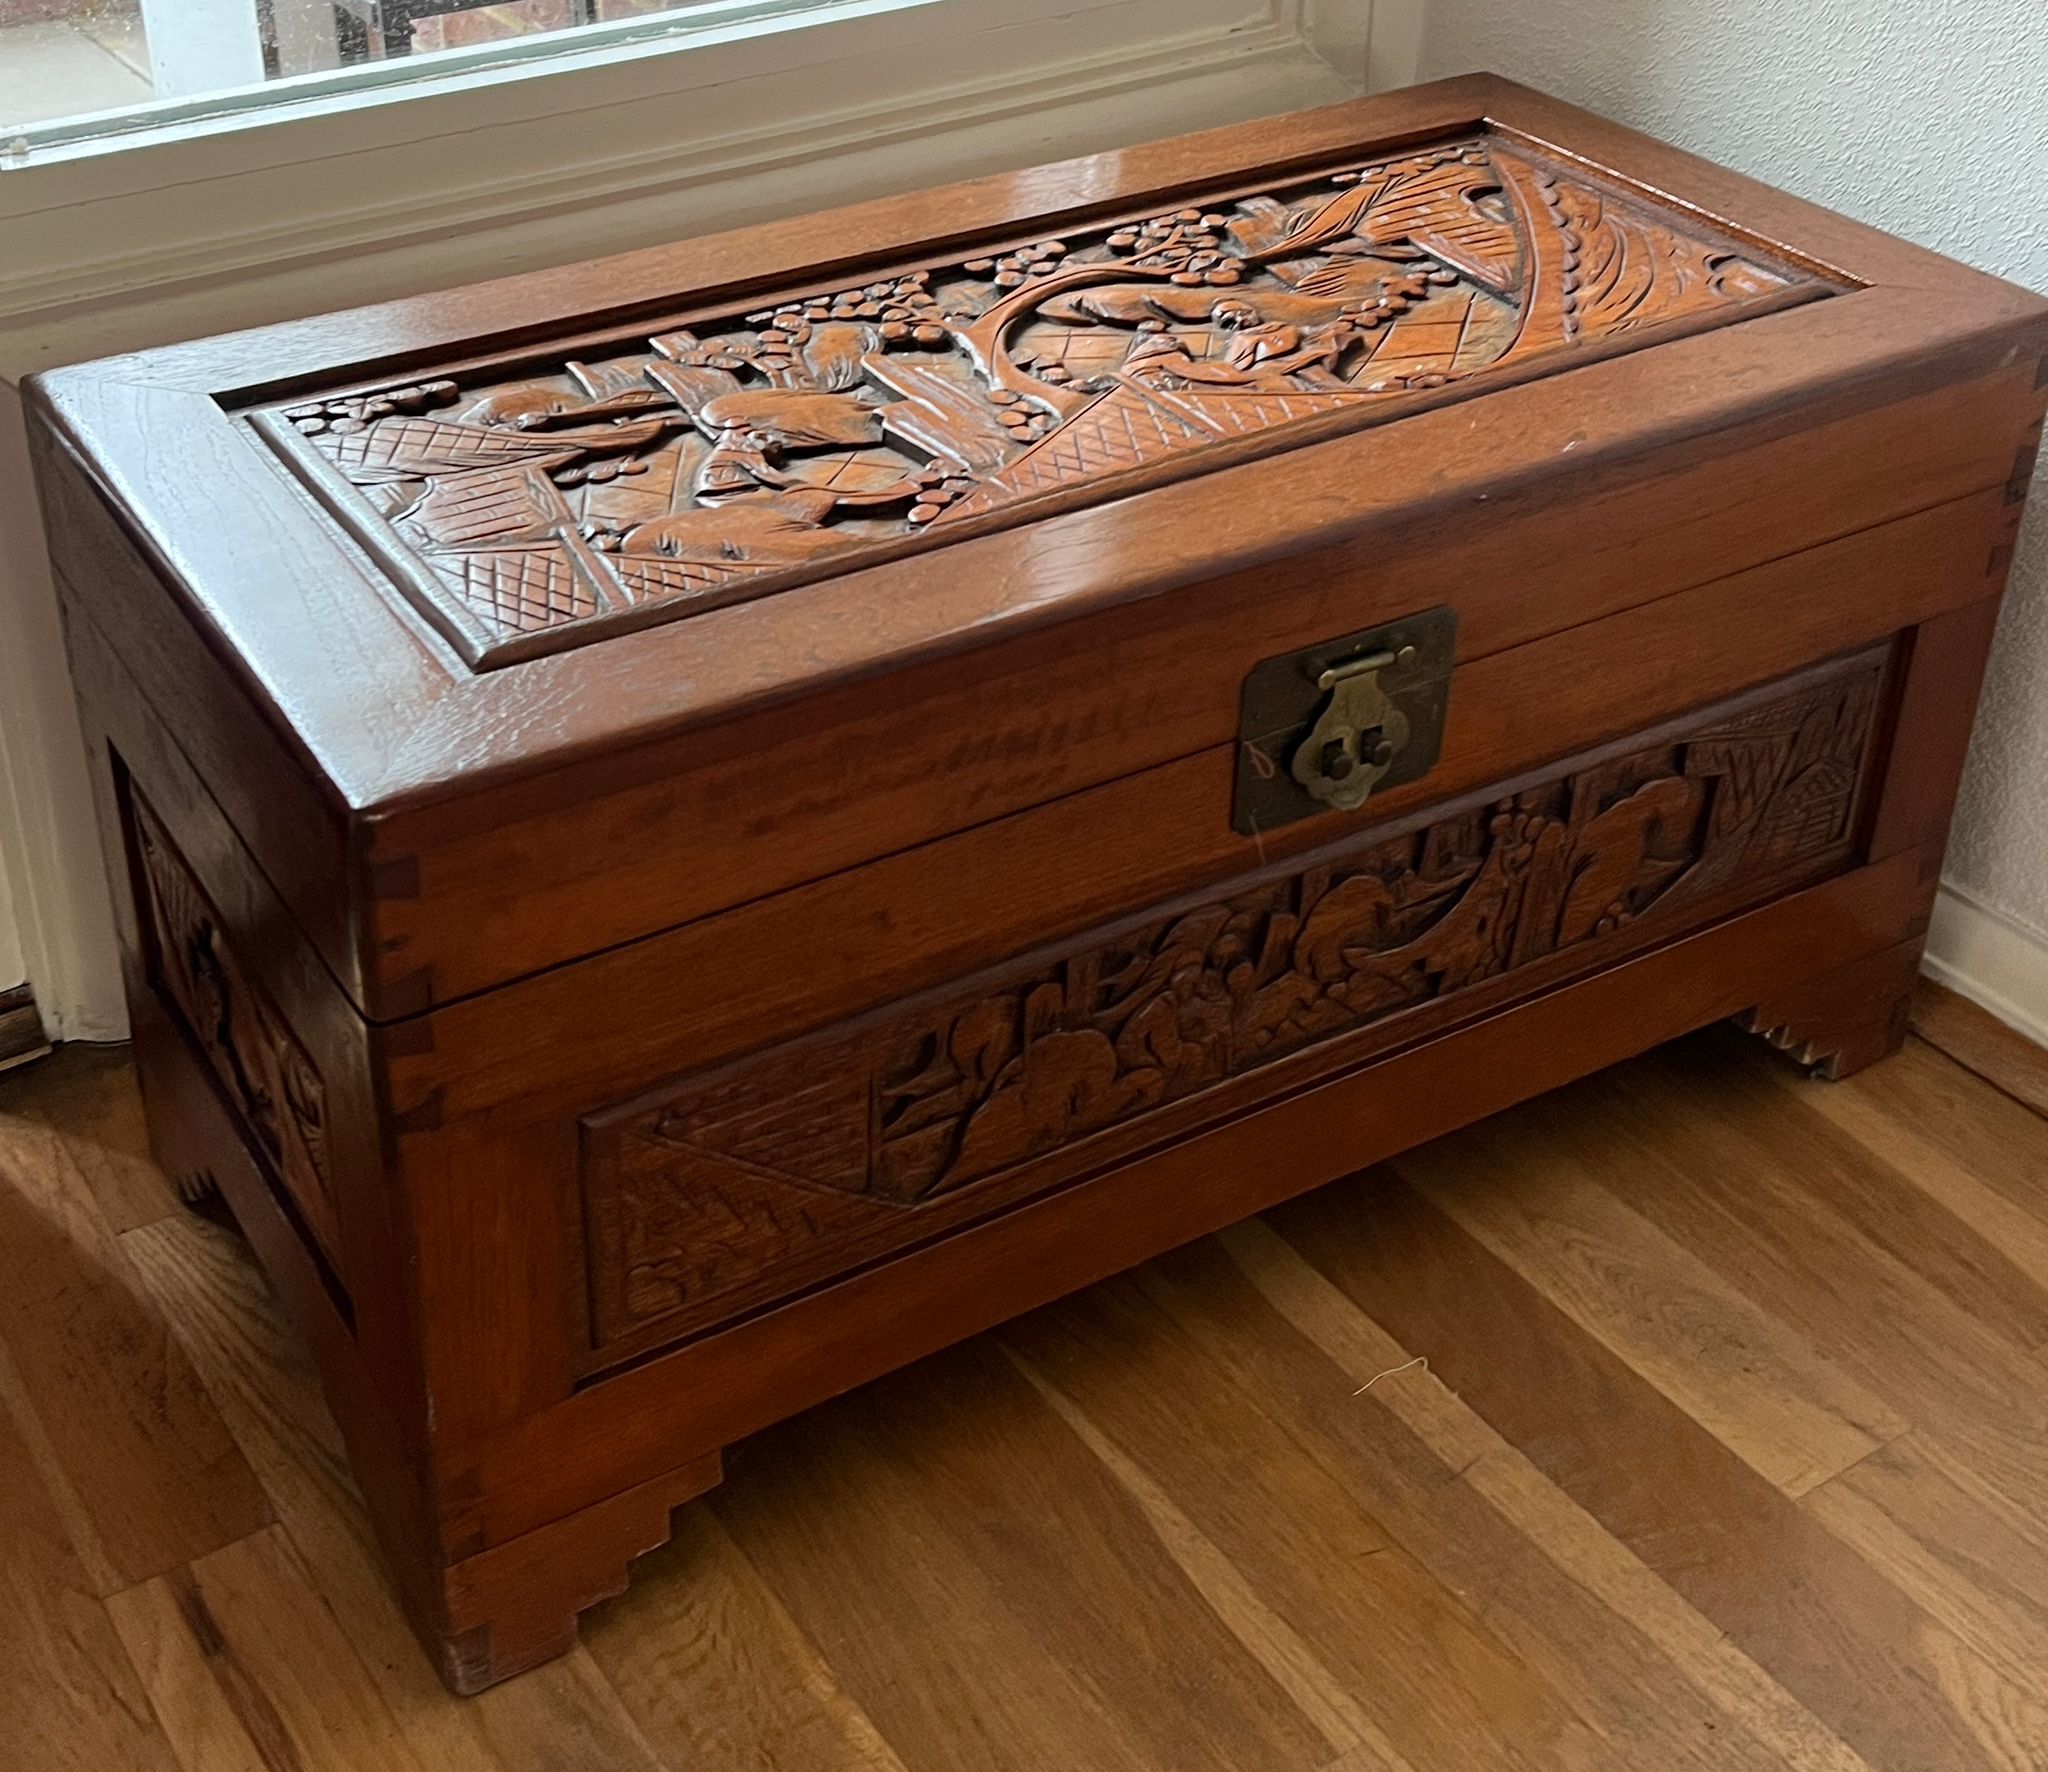 A camphor chest with brass fittings and carved pastural scene (74cm x 36cm x 40cm) - Image 2 of 7